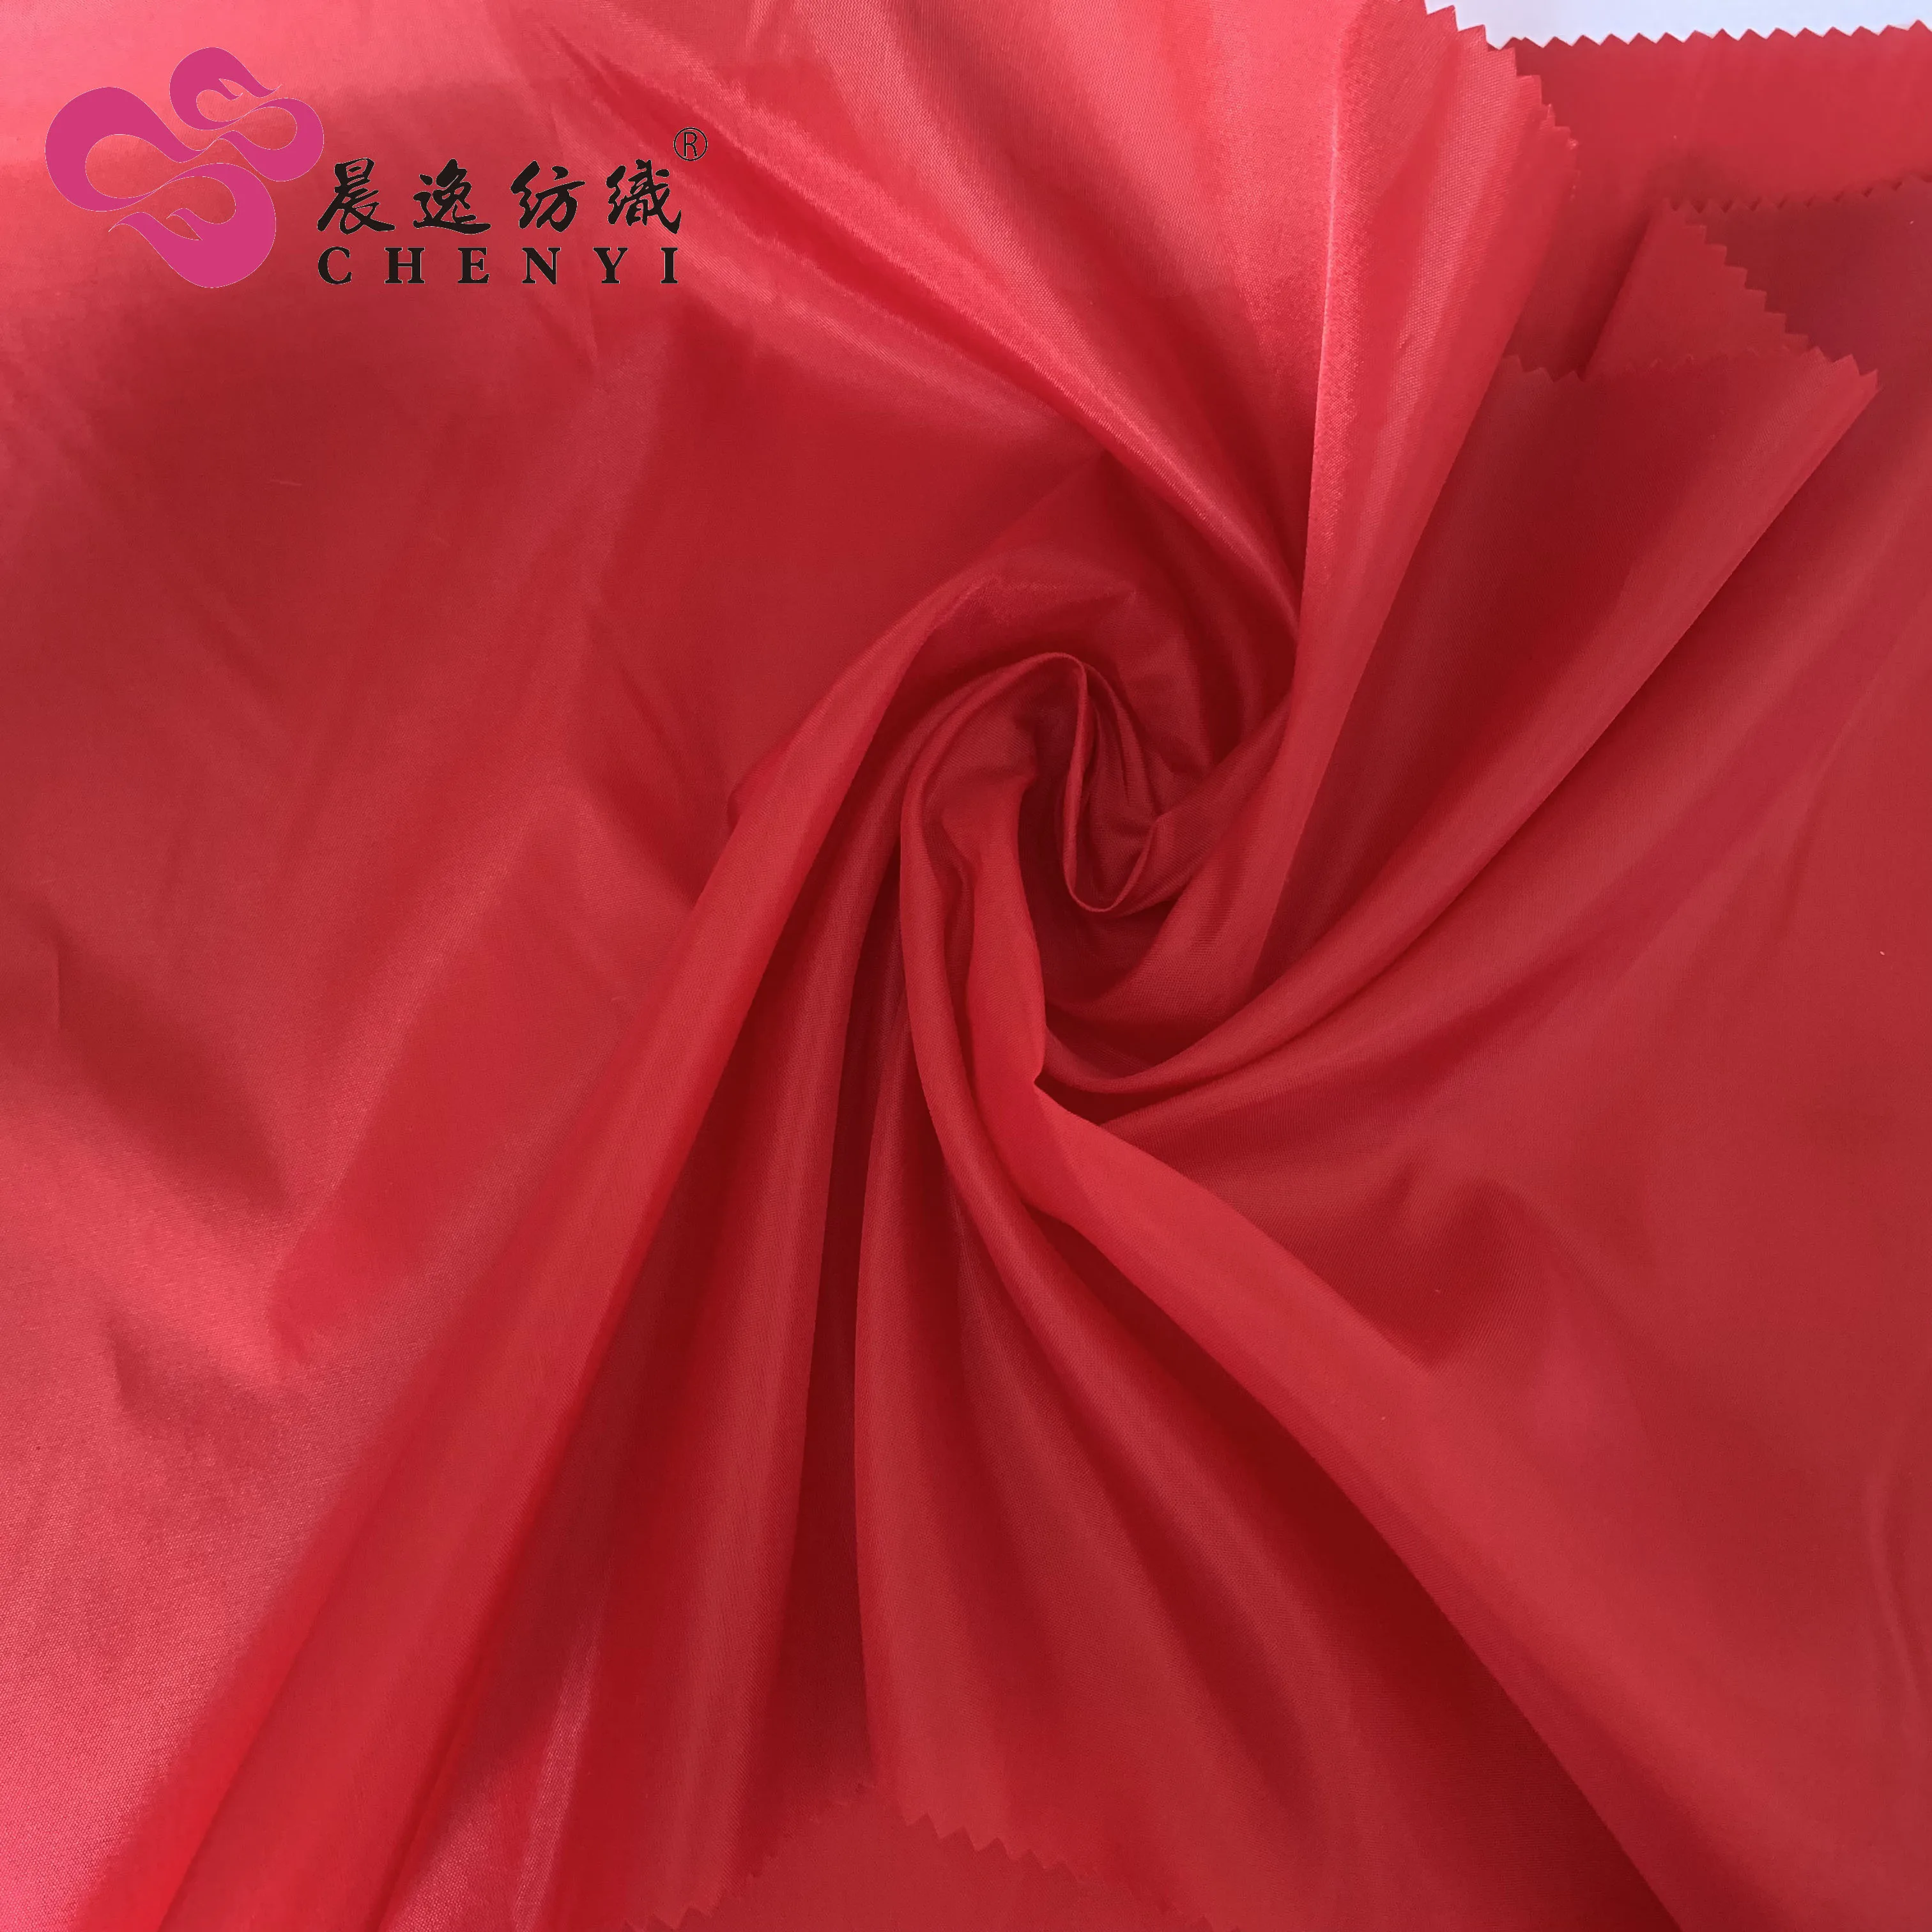 
hangzhou textiles 100% polyester lining fabric  (505509963)